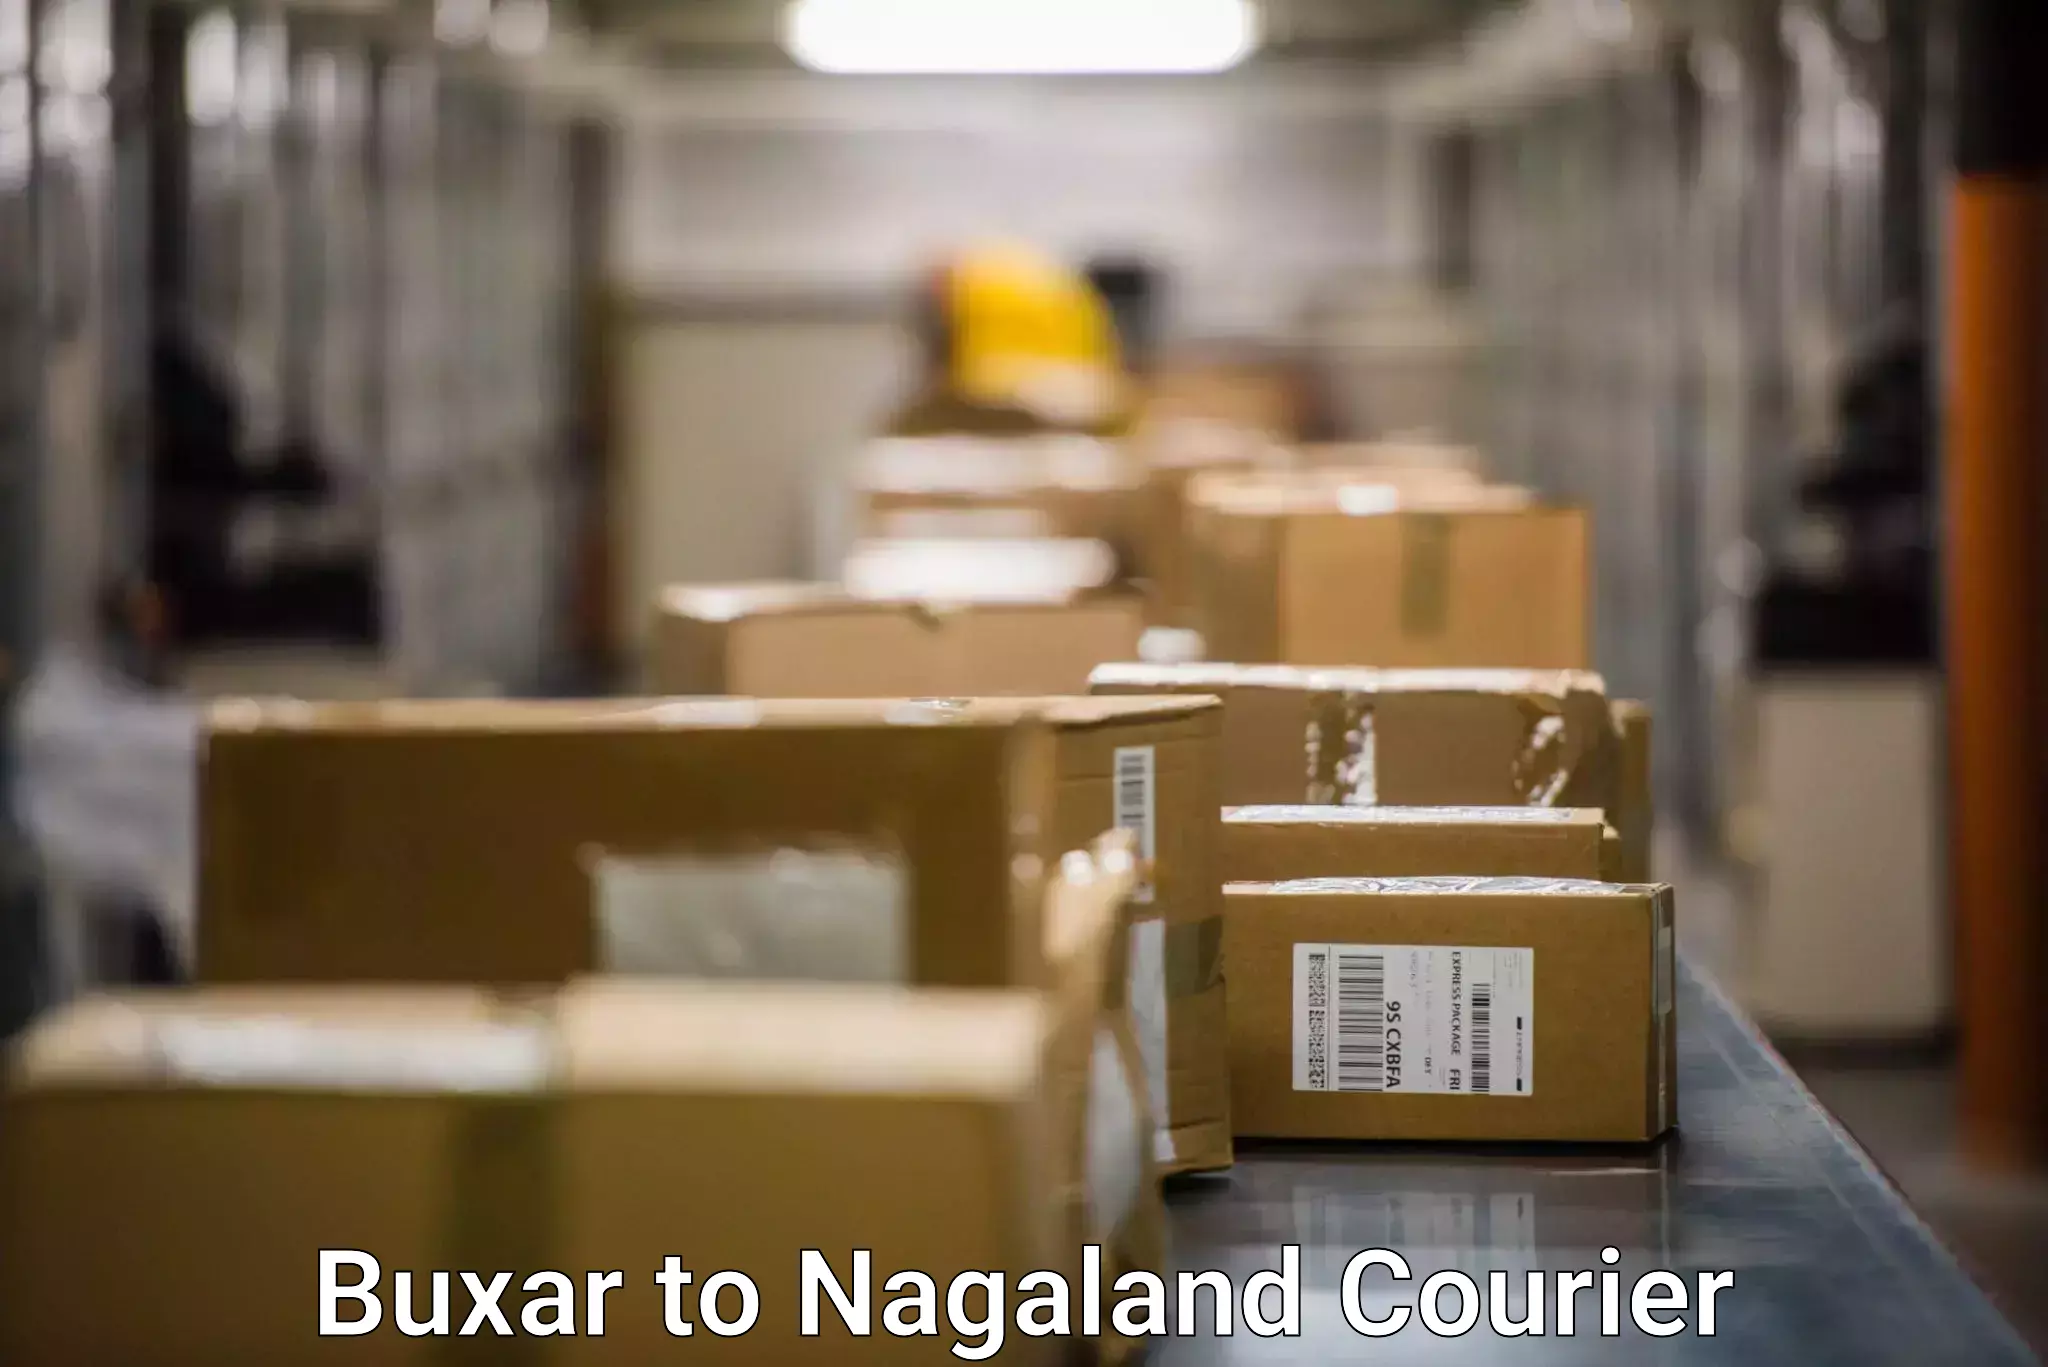 Advanced delivery network Buxar to Nagaland